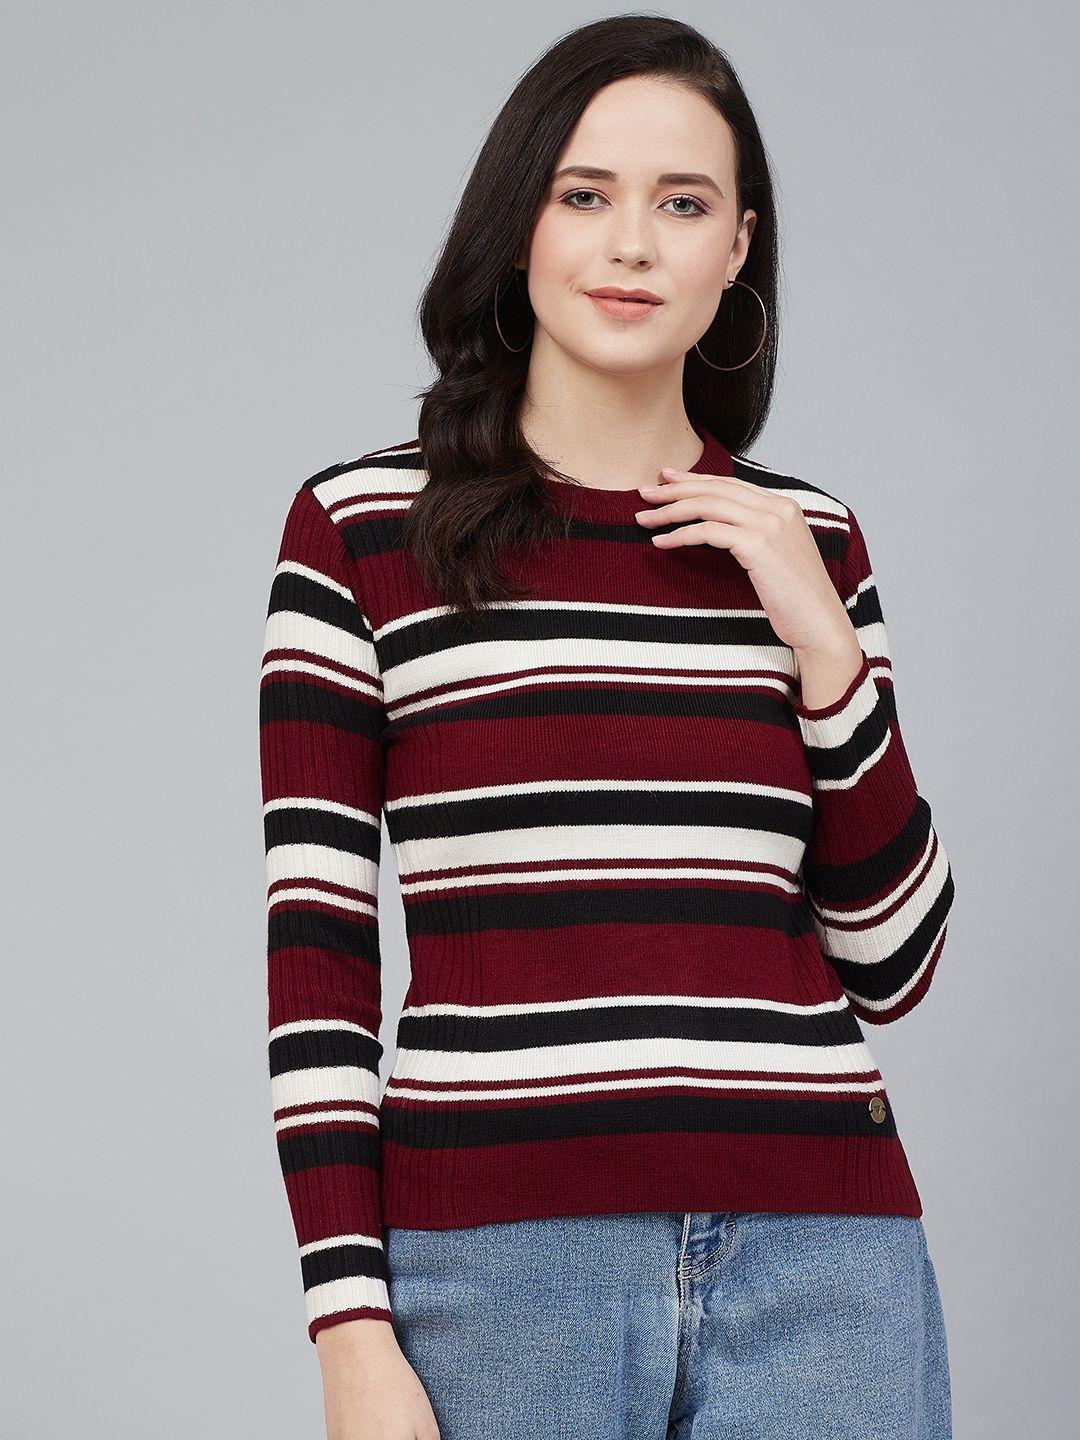 cayman women maroon & off white striped pullover acrylic sweater